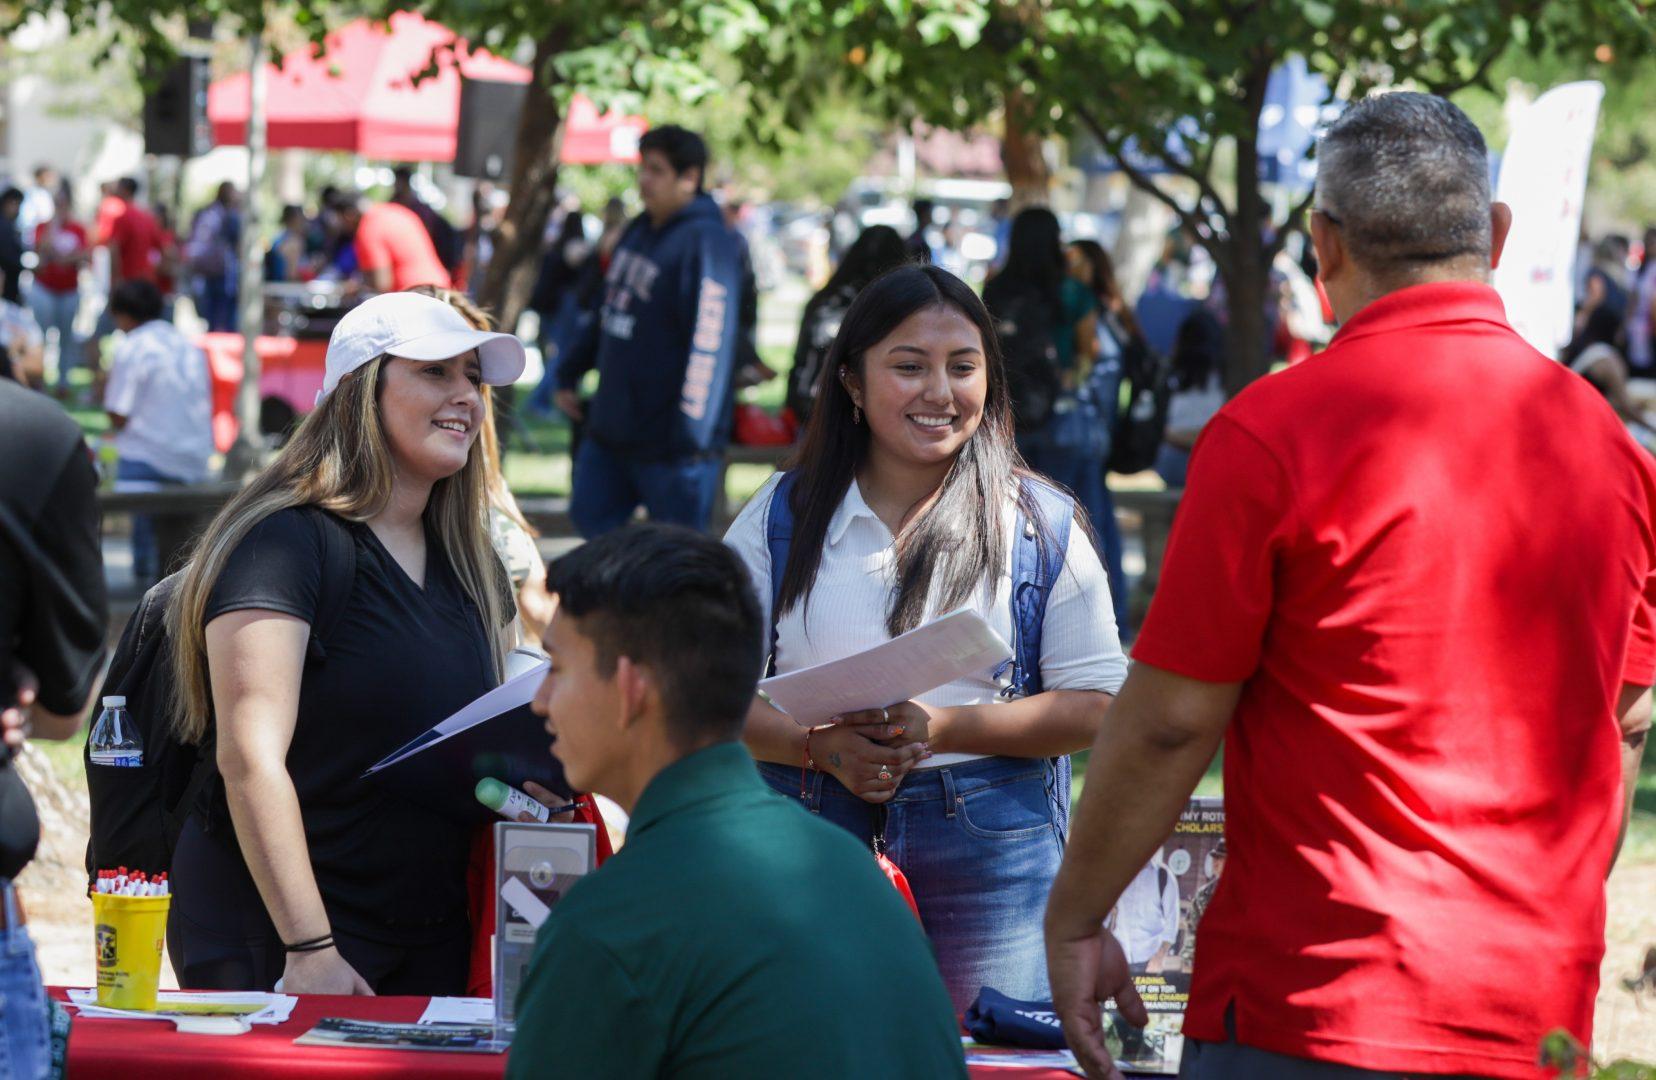 Students attend the resource fair as part of Big Bulldog Welcome event on Aug. 22, 2022. (Carlos Rene Castro/The Collegian)